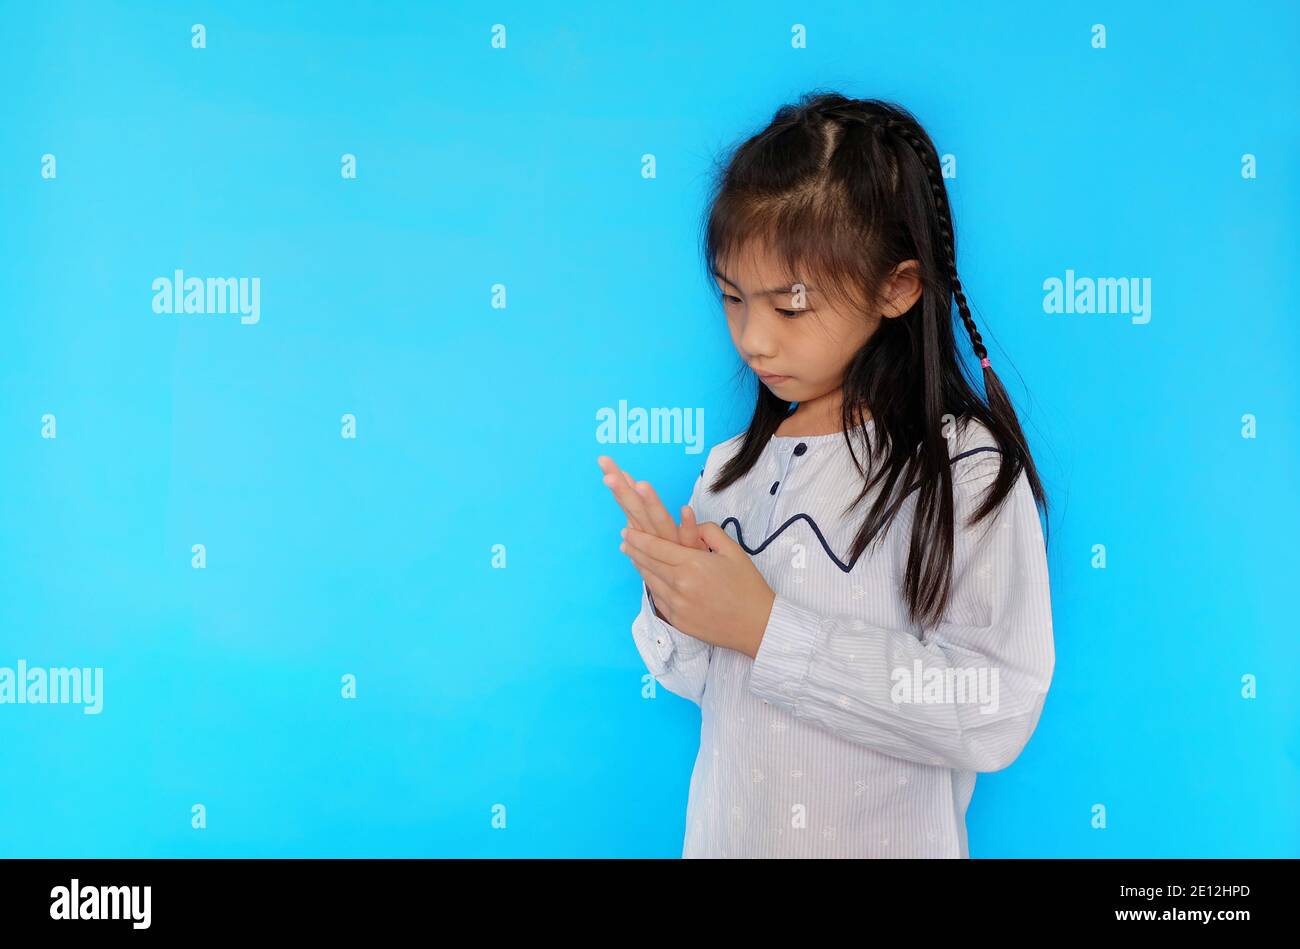 A cute young Asian girl is trying to solve a math problem, using her fingers to count the numbers. Plain light blue background. Stock Photo